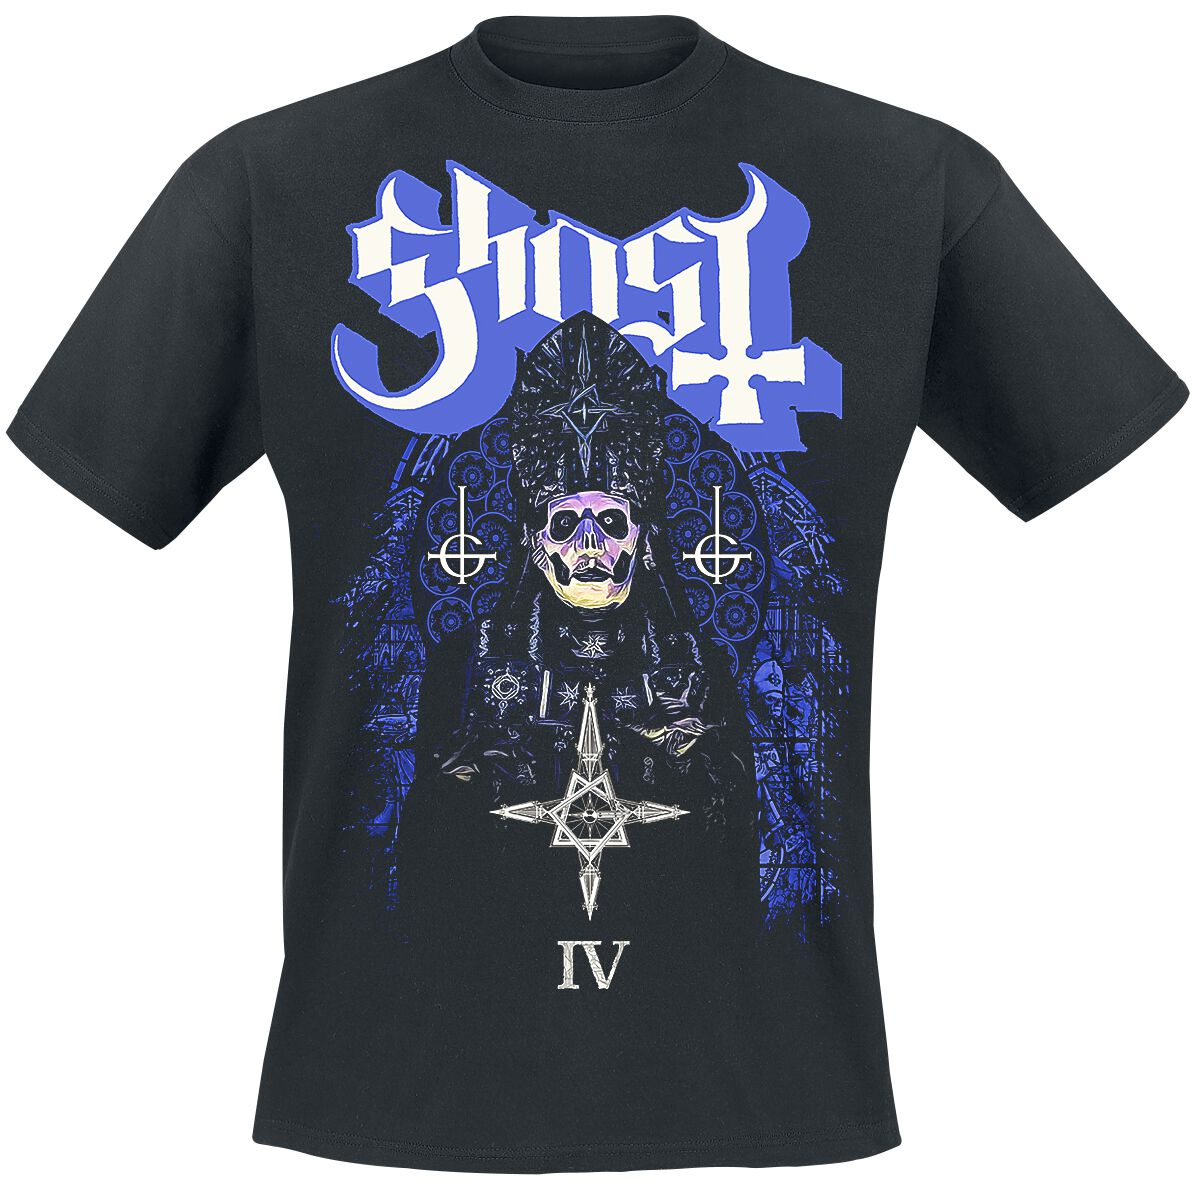 Ghost Stained Glass IV T-Shirt schwarz in XXL